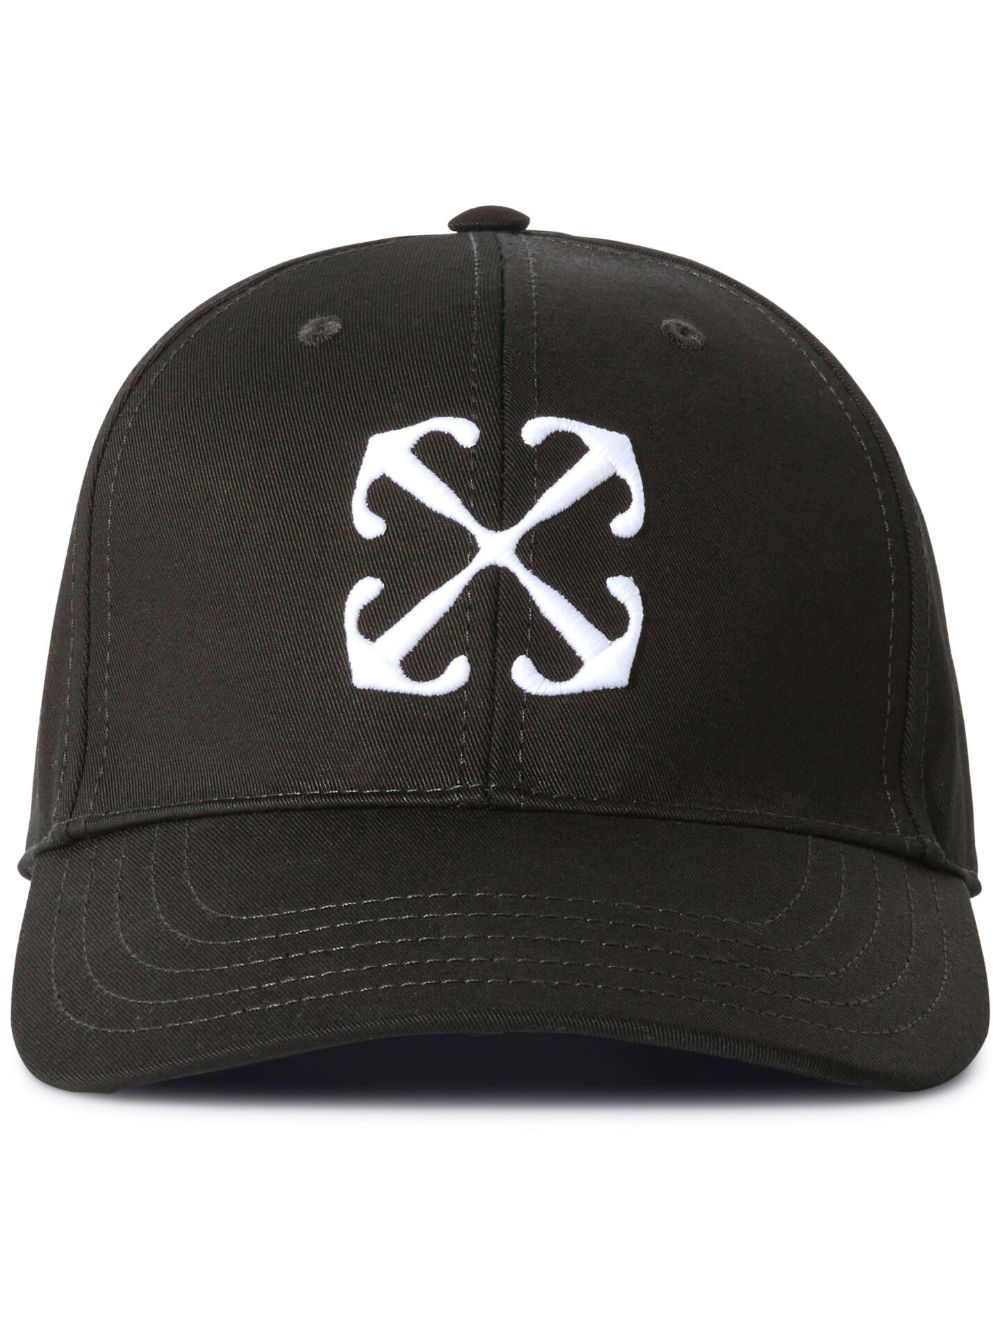 Arrows-embroidered cap